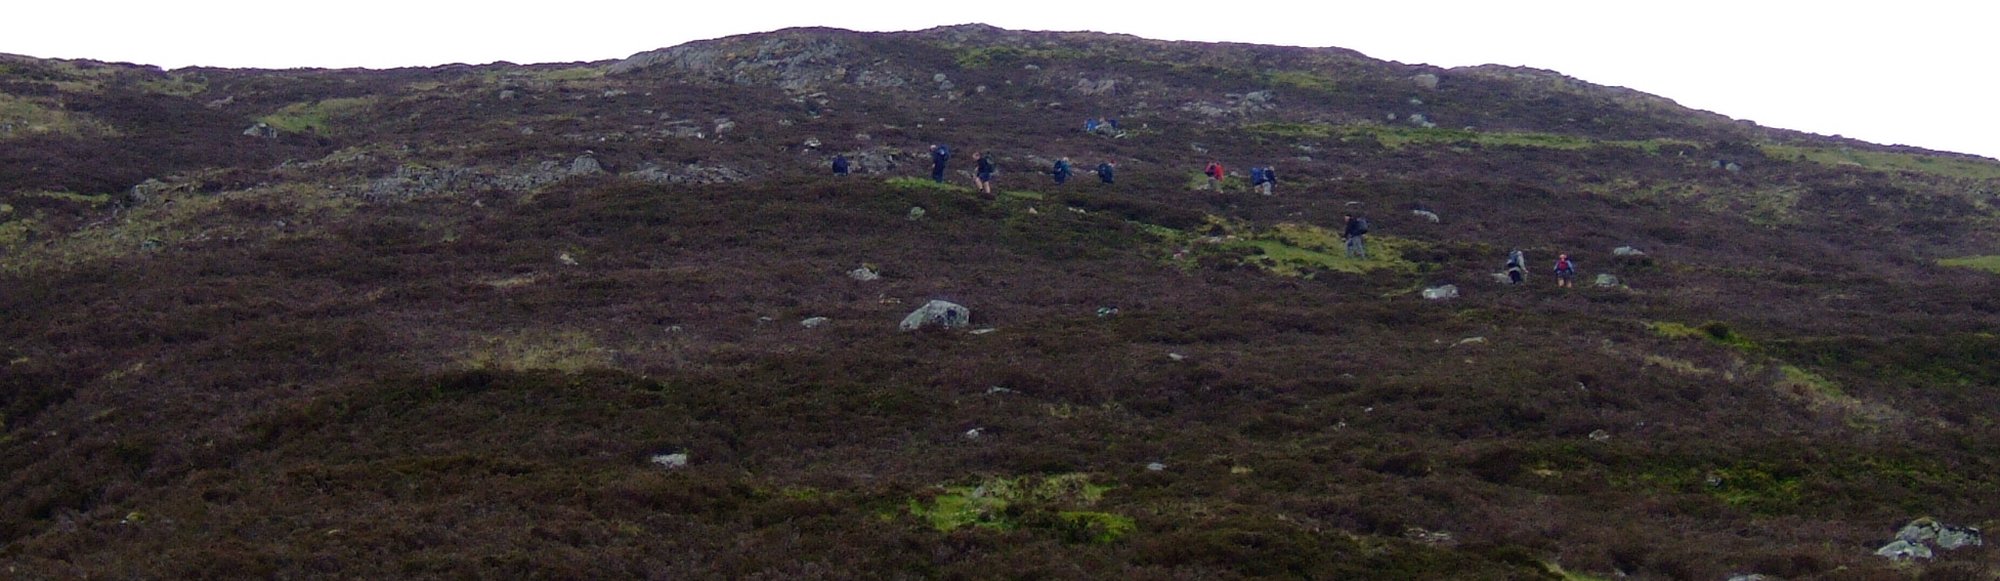 Climbing the Devil's Staircase - about 16 people ahead of me